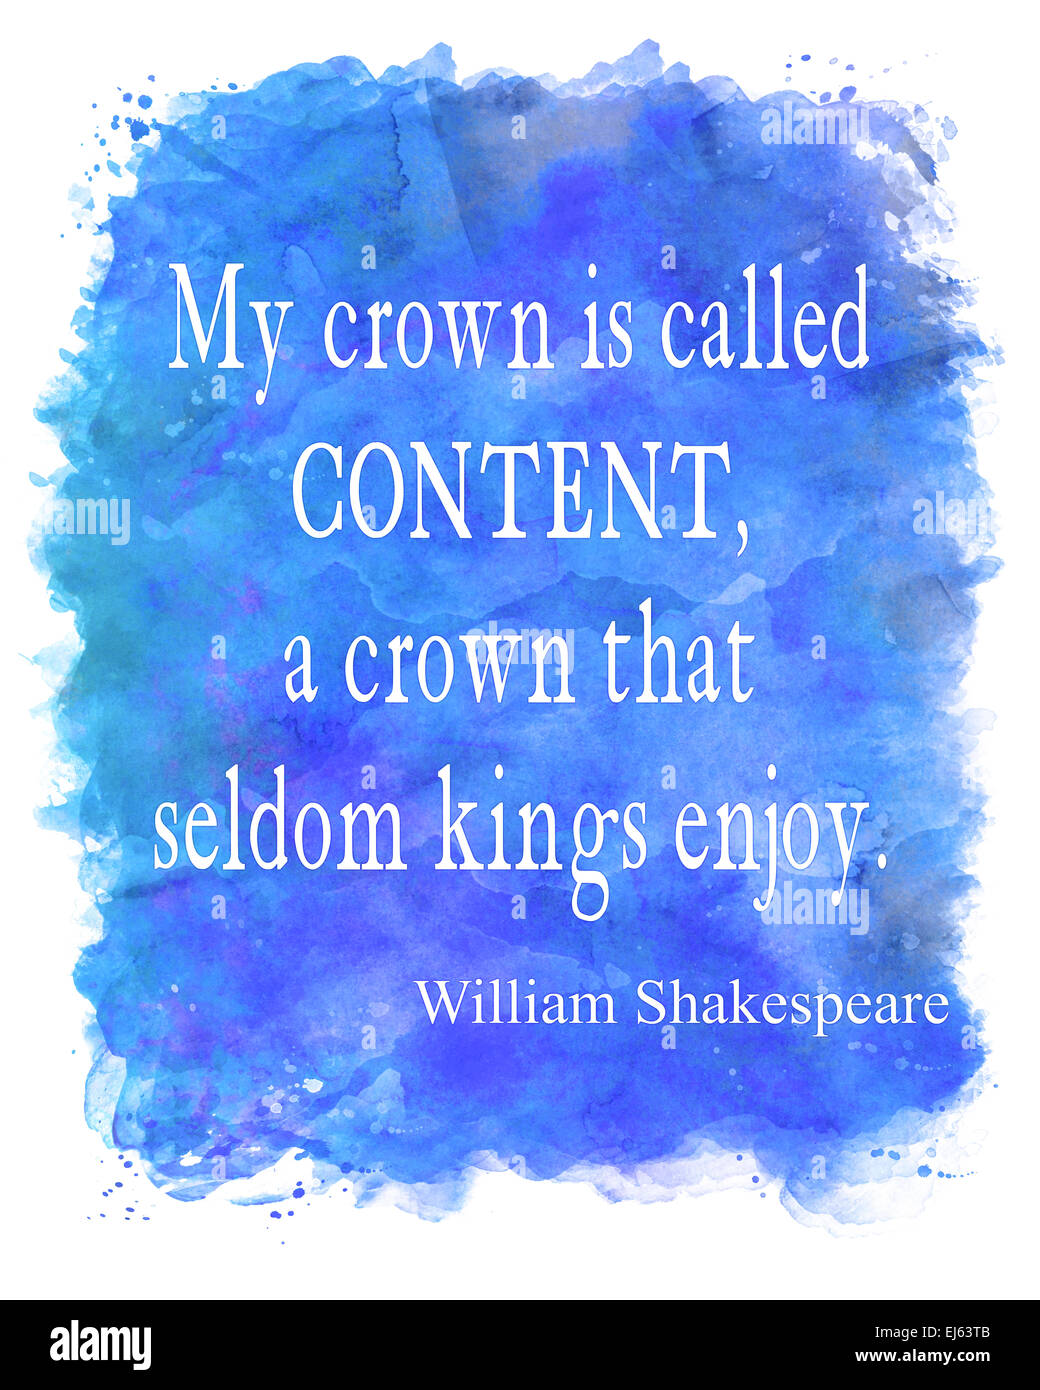 Shakespeare Content Watercolor Motivational Quote | Wall Art Inspirational Quotes in Teal, Blue, Purple, and White Stock Photo